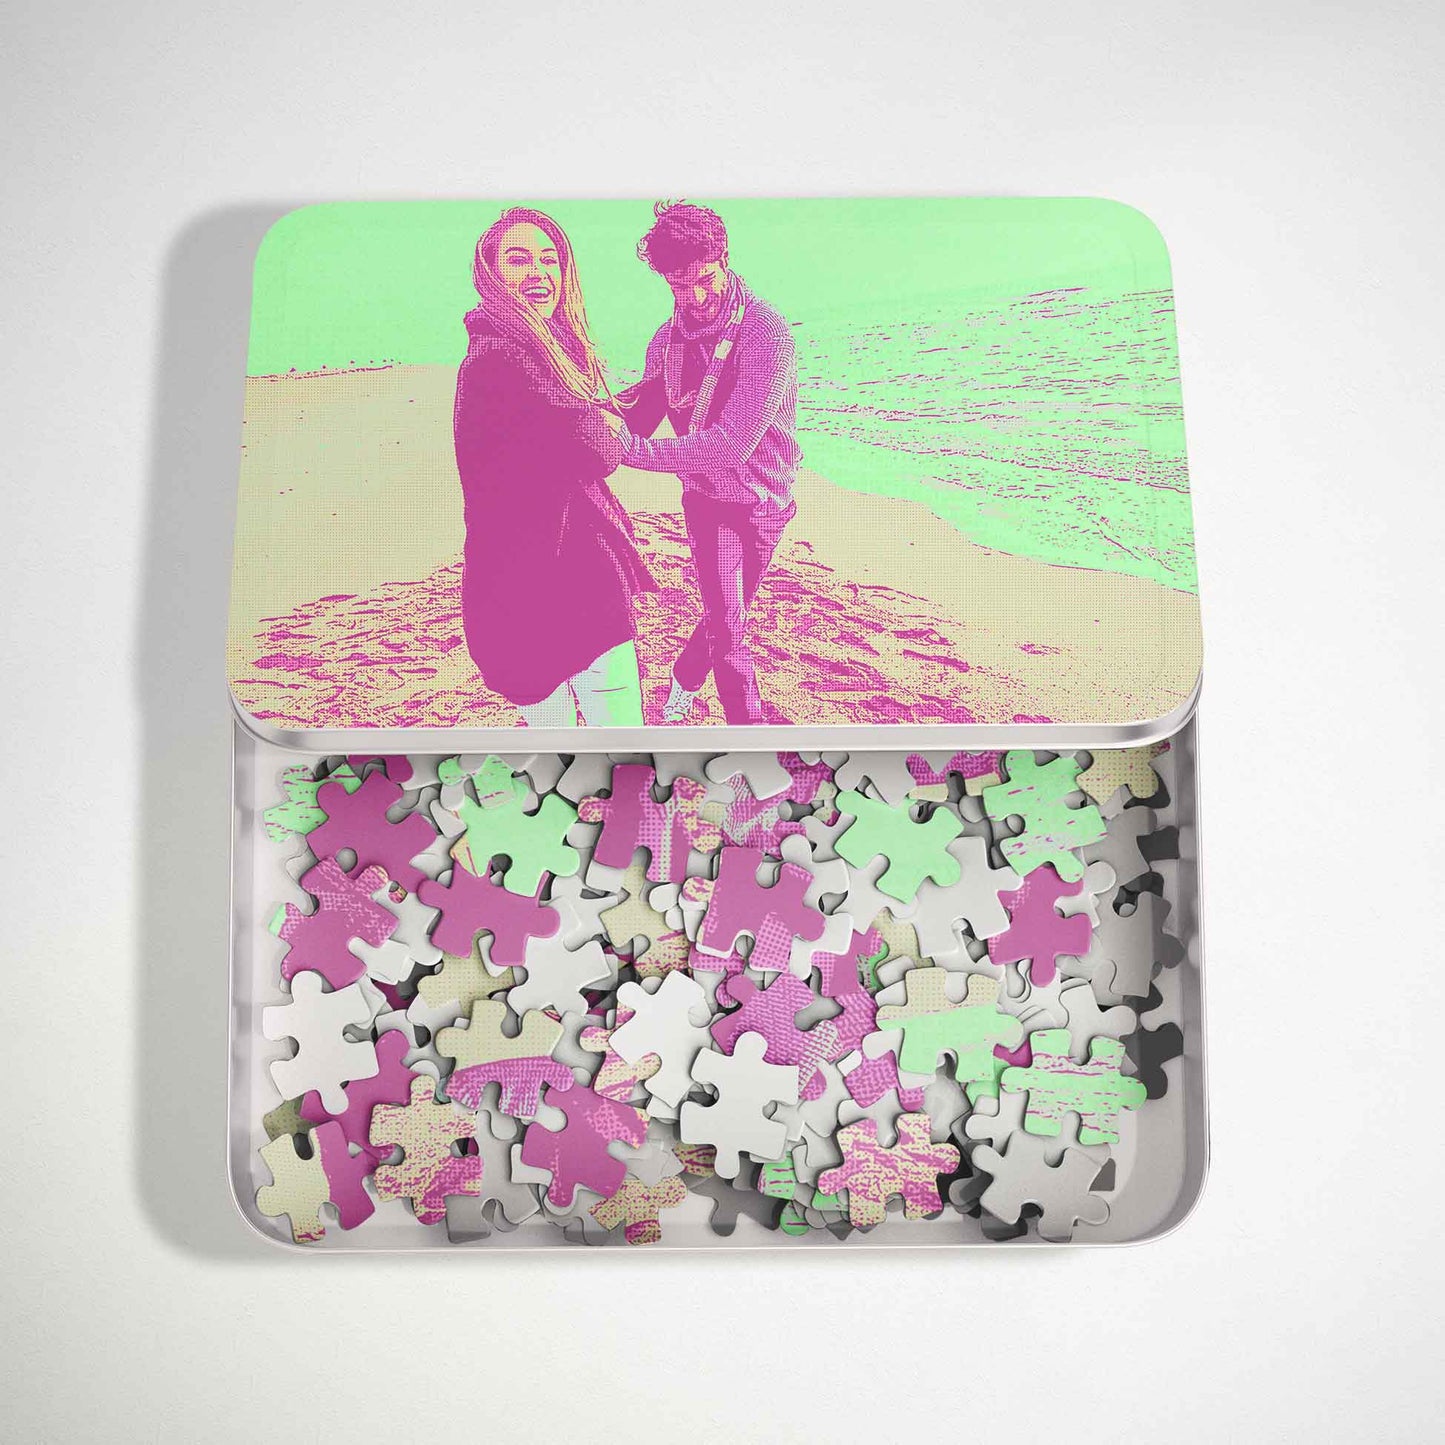 Unleash creativity with a Personalised Green & Pink Pop Art Jigsaw Puzzle. Cartoon from photo in a vibrant pop art style. Handmade with dye sublimation print. A unique, original, and bright gift for friends, family, anniversaries, and birthdays